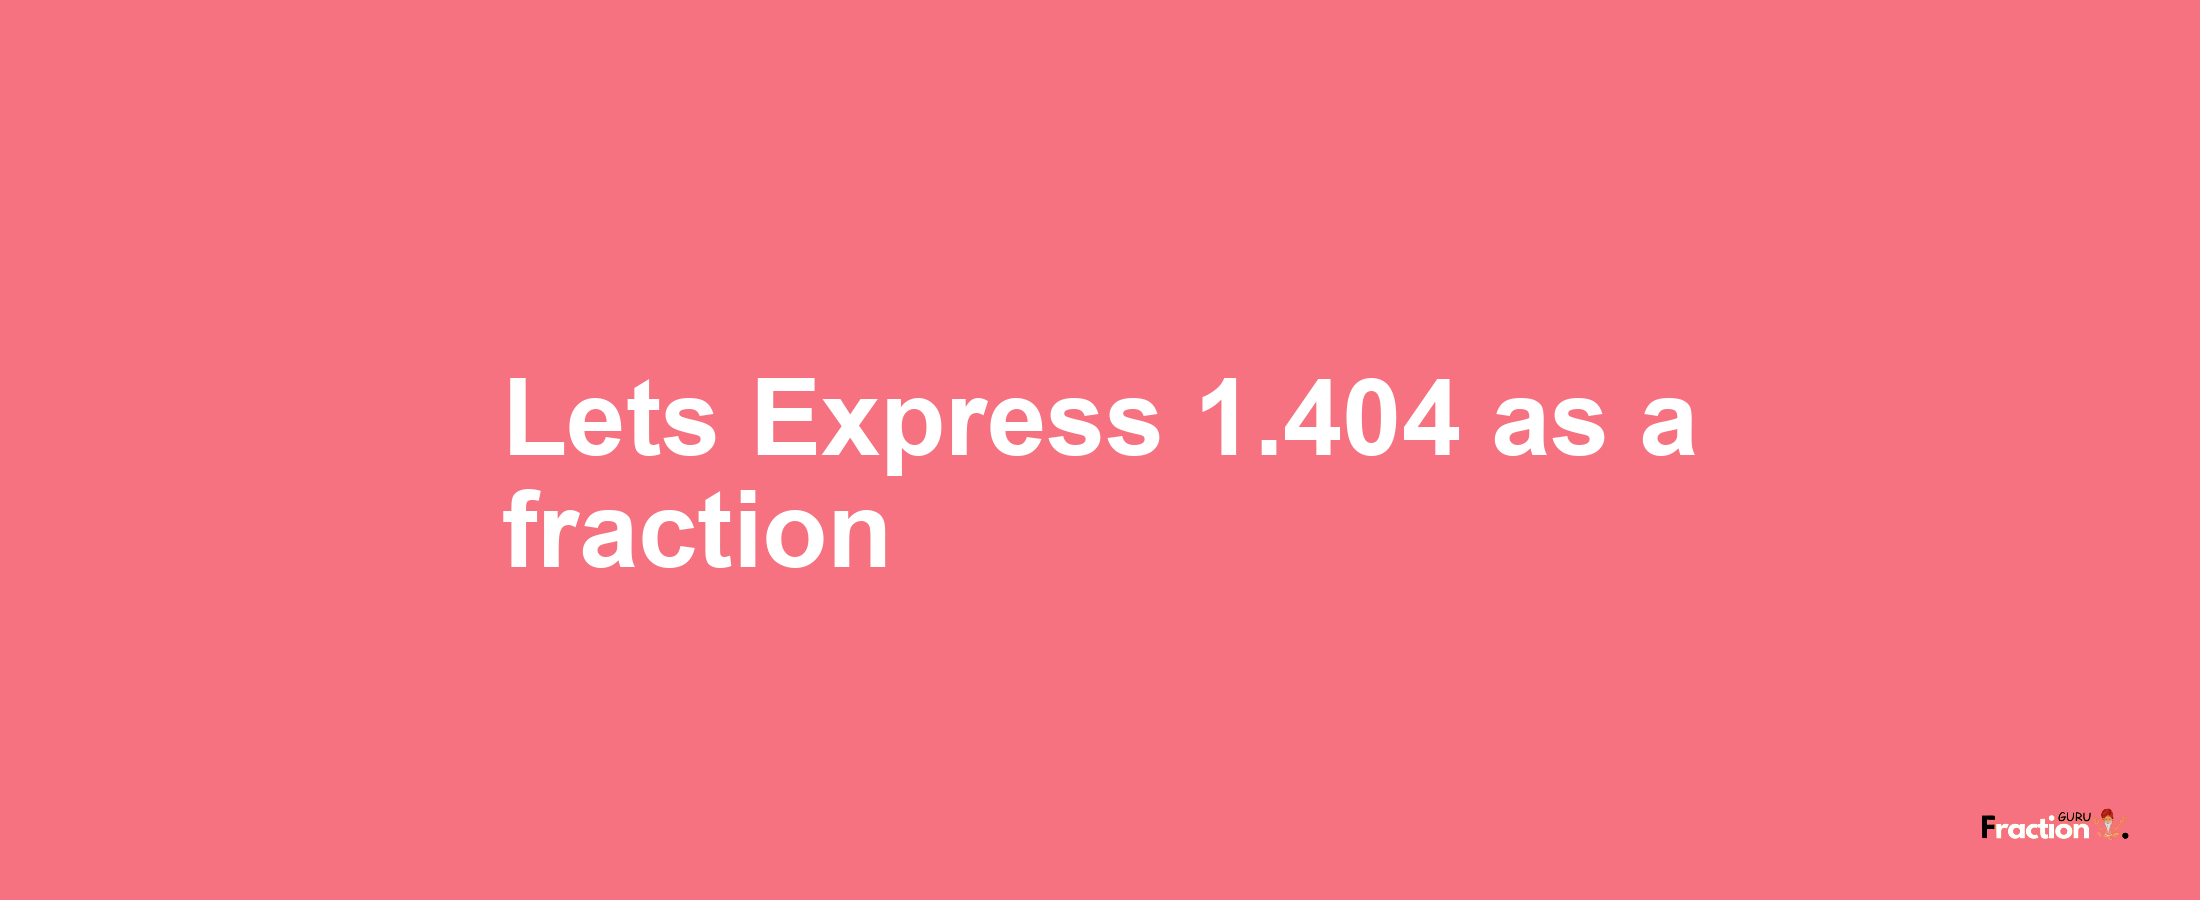 Lets Express 1.404 as afraction